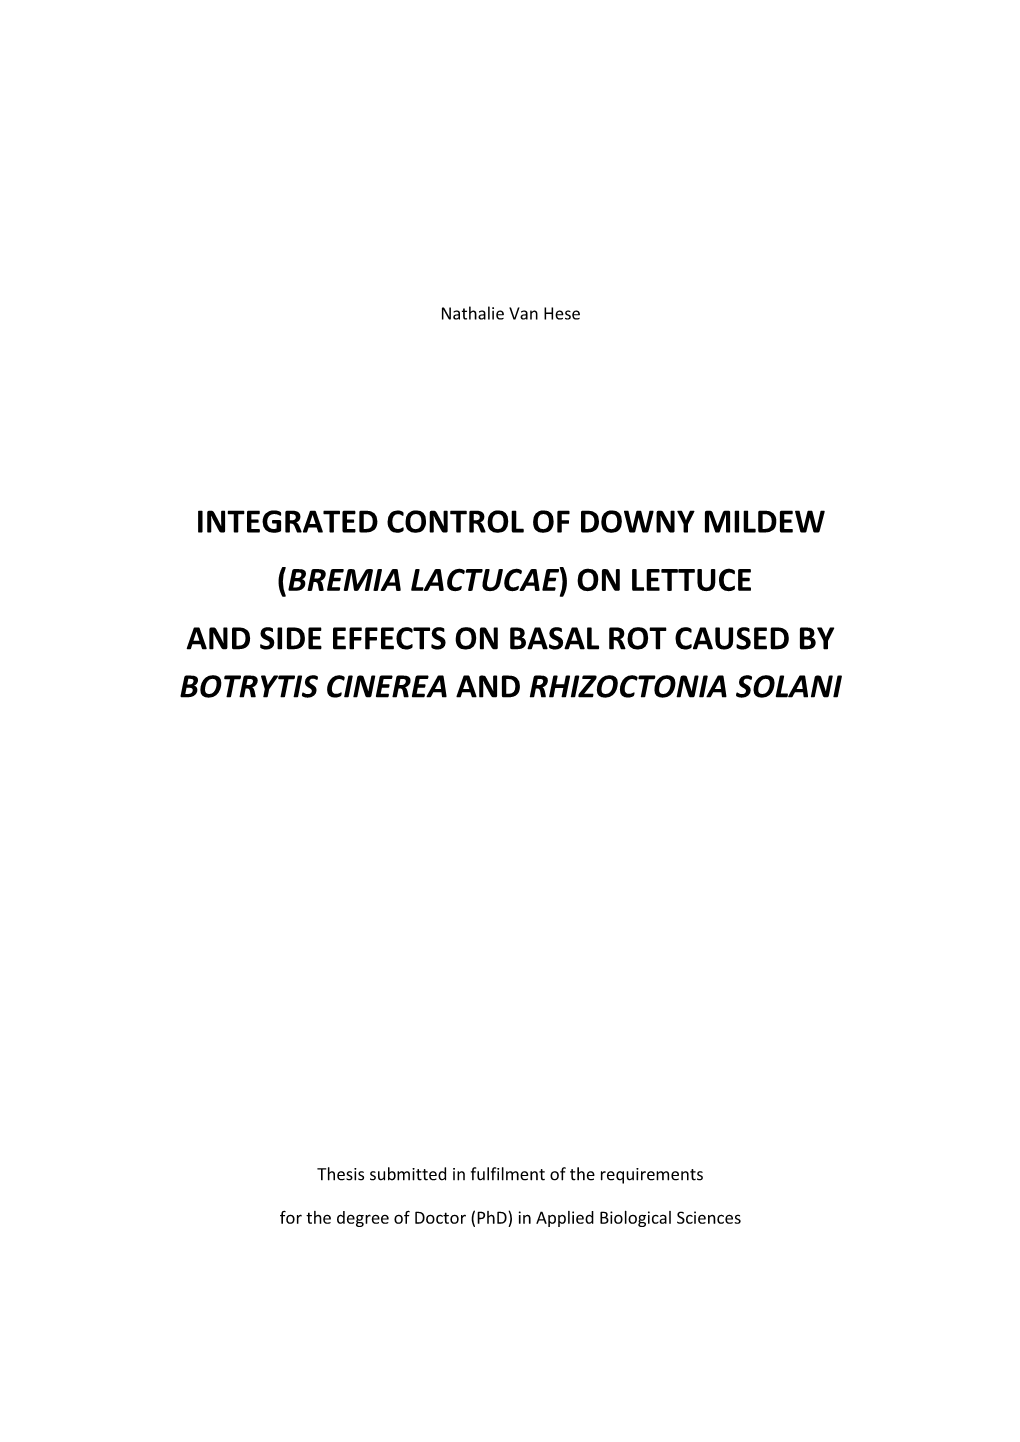 Bremia Lactucae) on Lettuce and Side Effects on Basal Rot Caused by Botrytis Cinerea and Rhizoctonia Solani